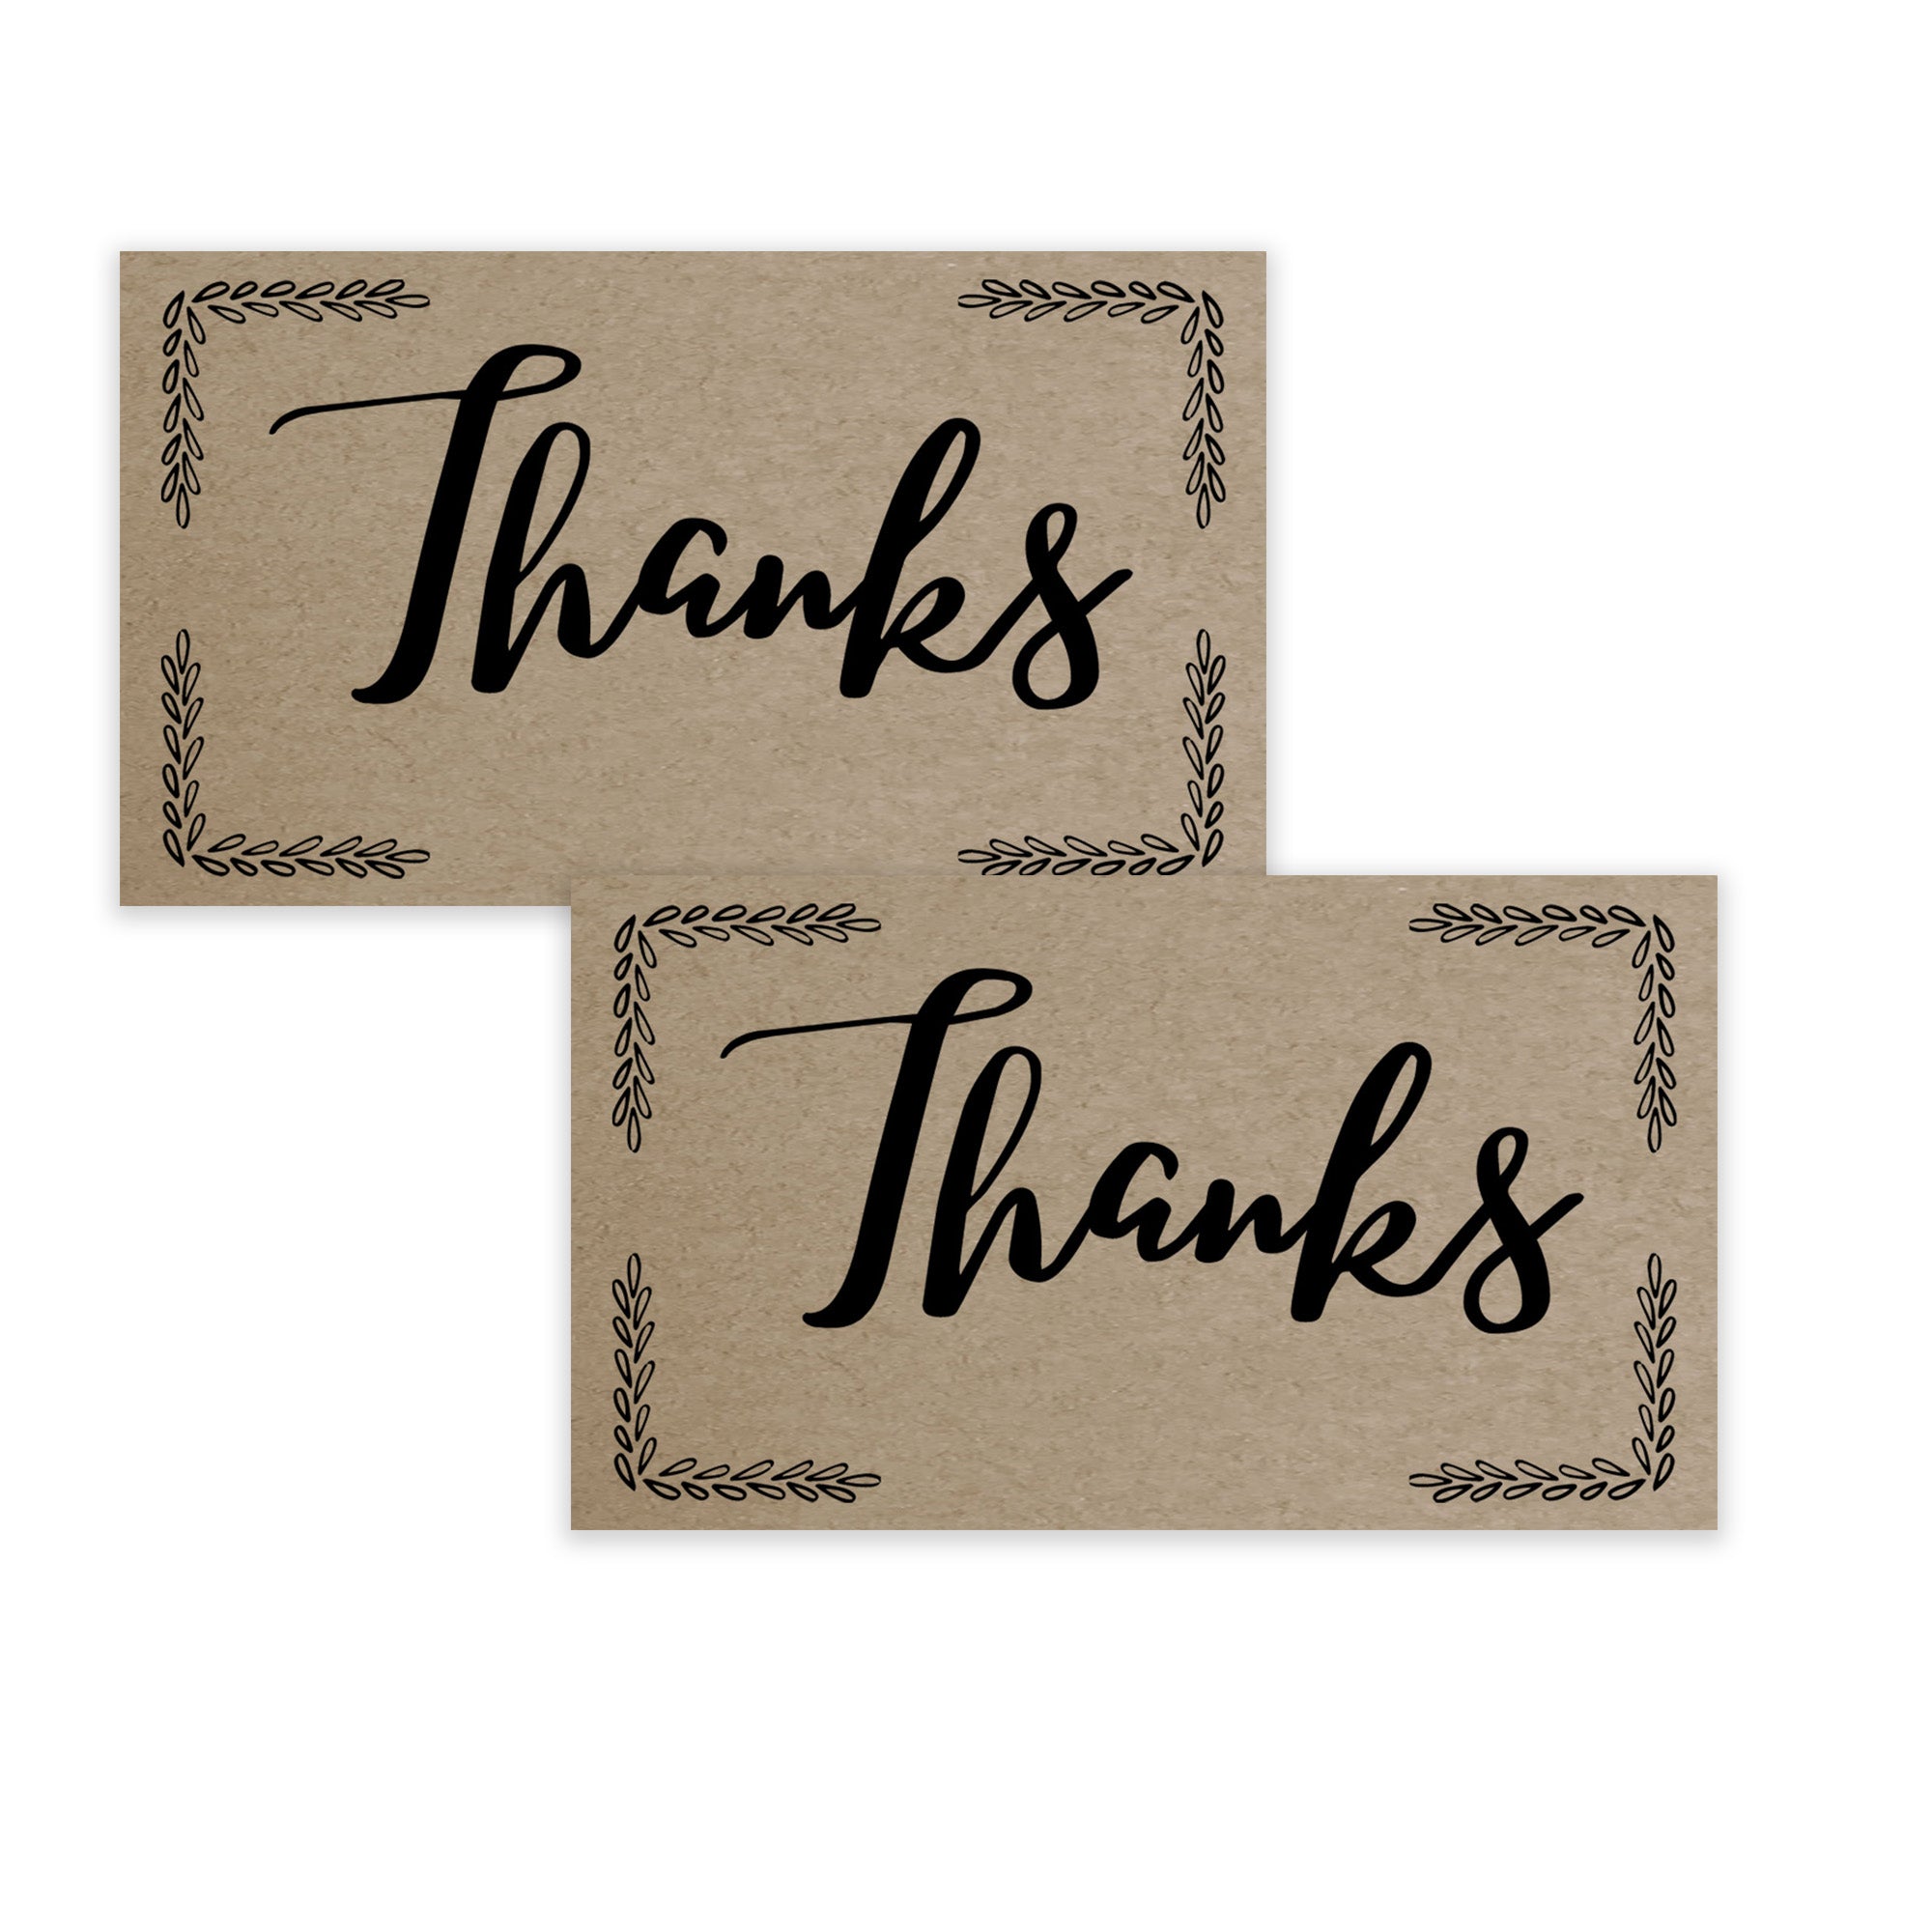 Kraft Business card size thank you cards for your small business